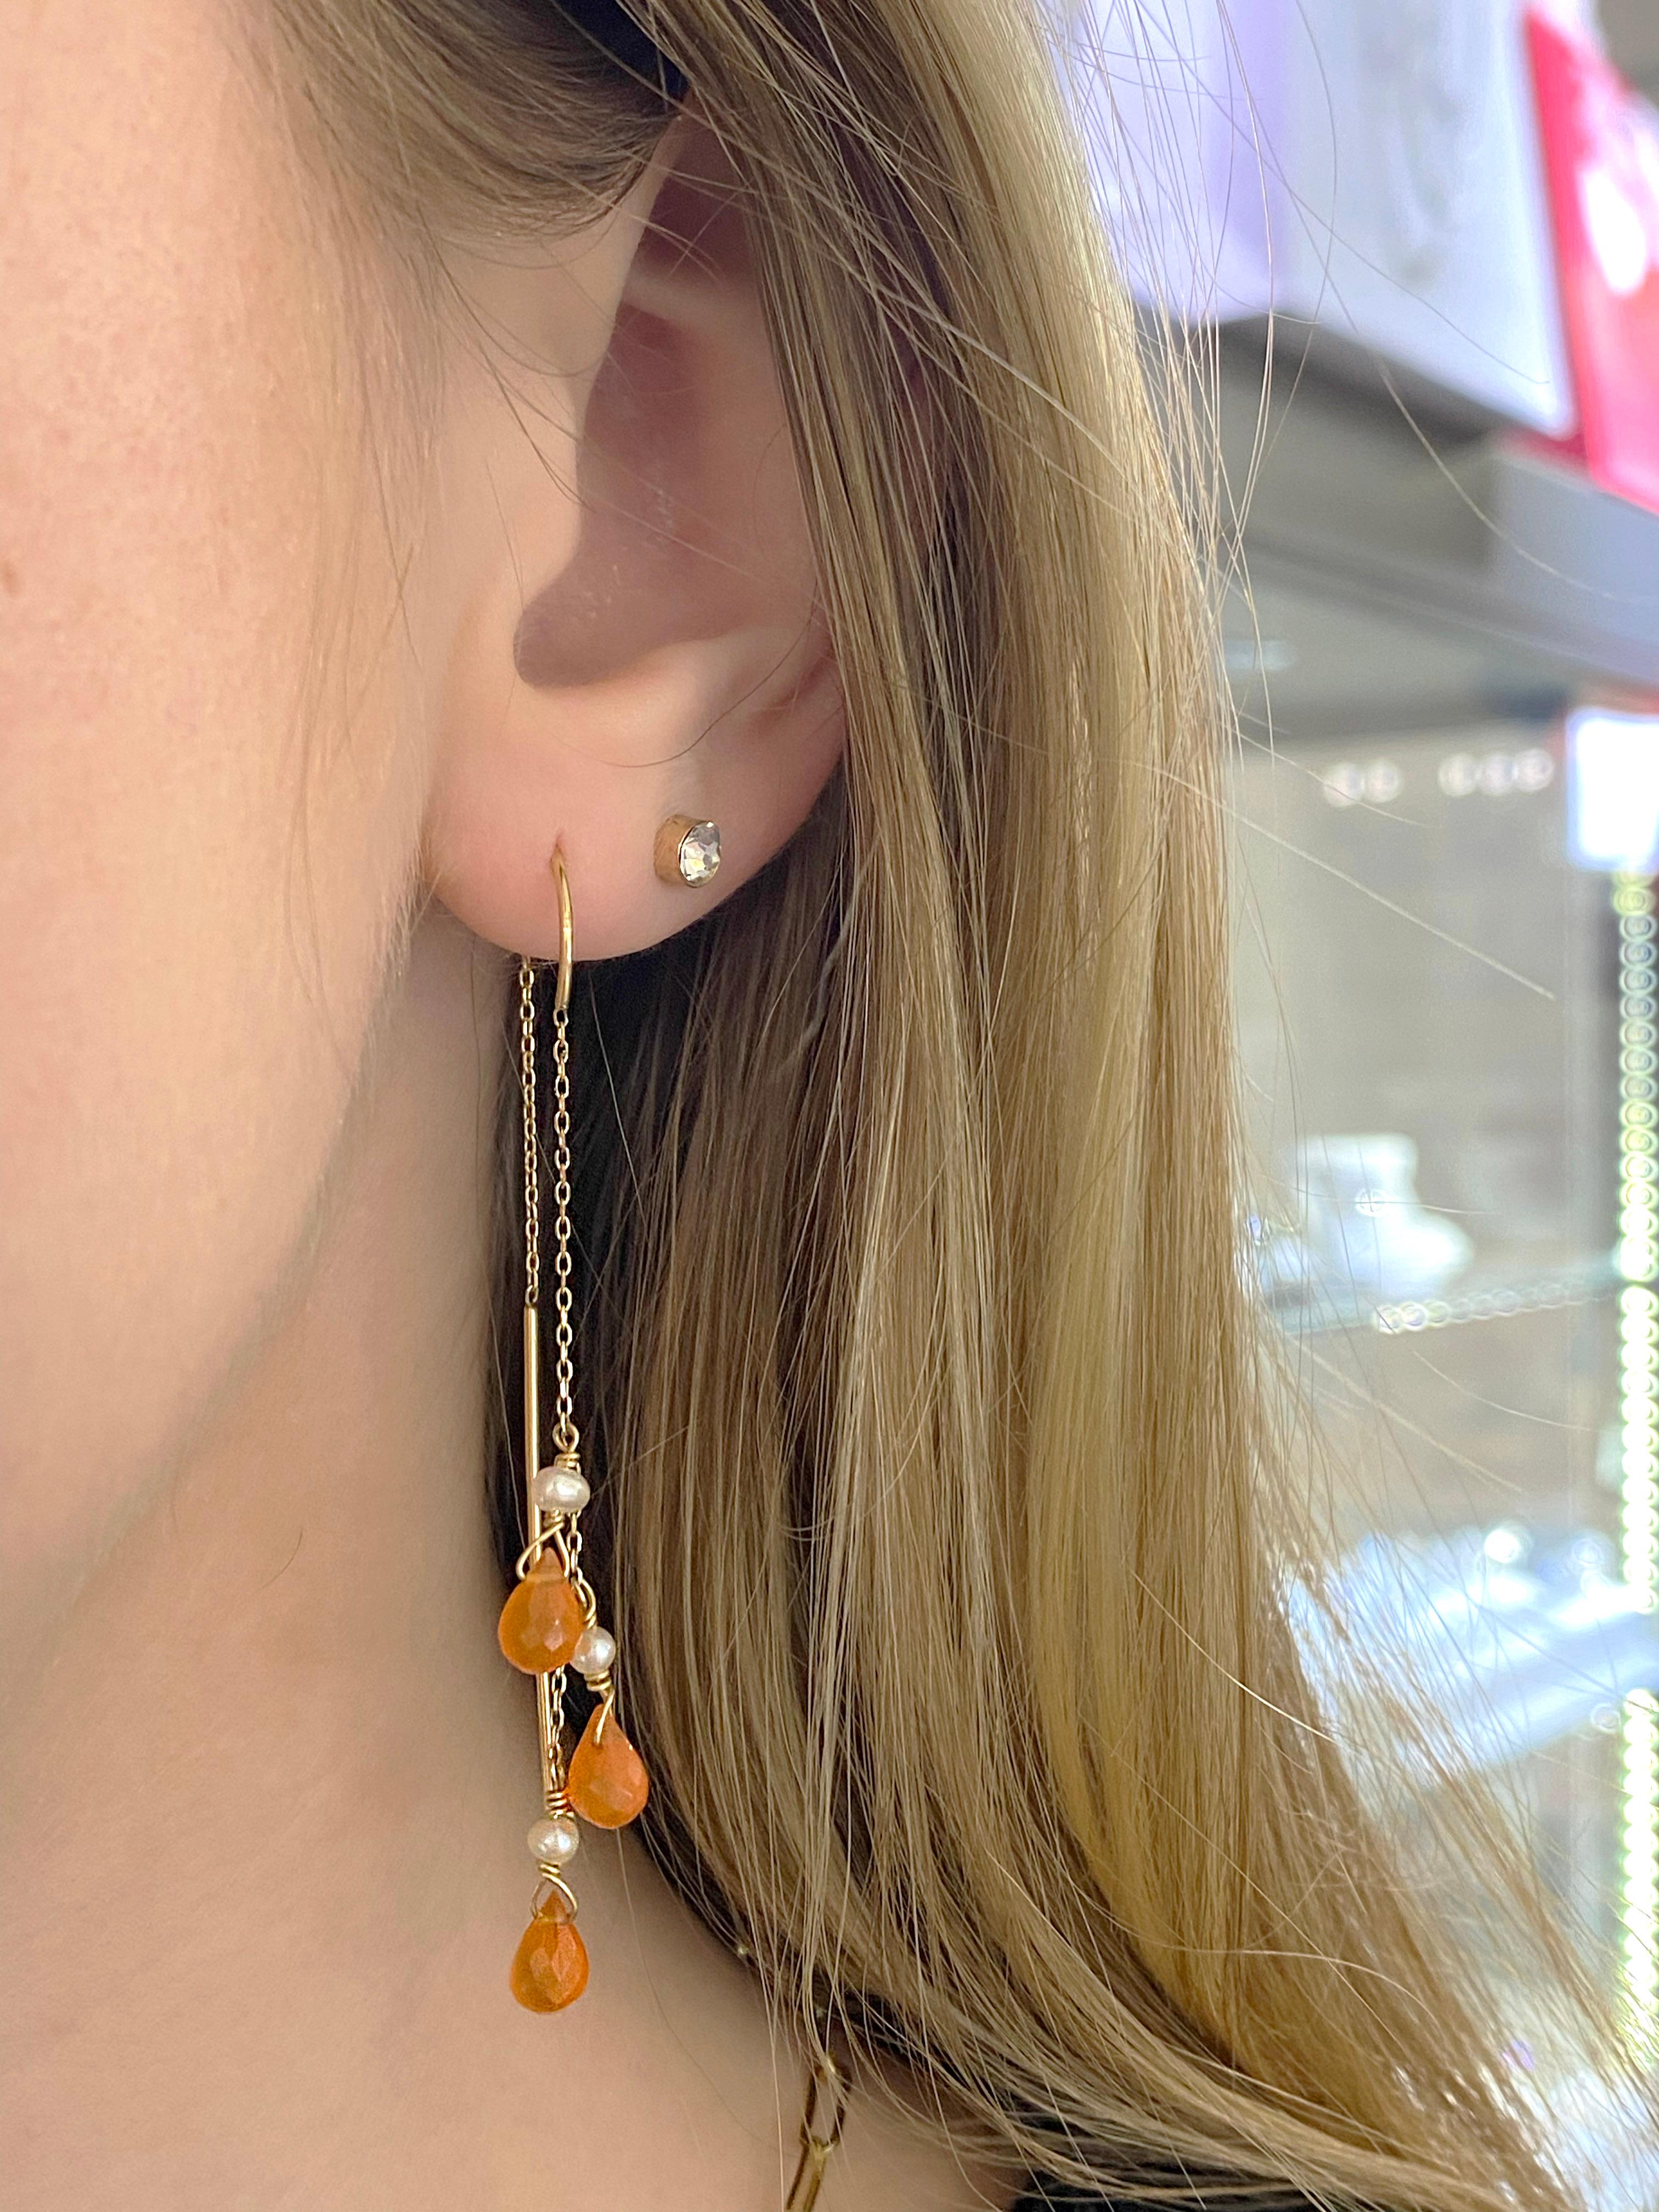 Original One-of-a-kind Threader Earrings. All handmade in our shop with the most delicate of hand to produce this intricate design that is absolute a perfect match! The threader is very secure and there is a unique Mexican Fire Opal gemstone that